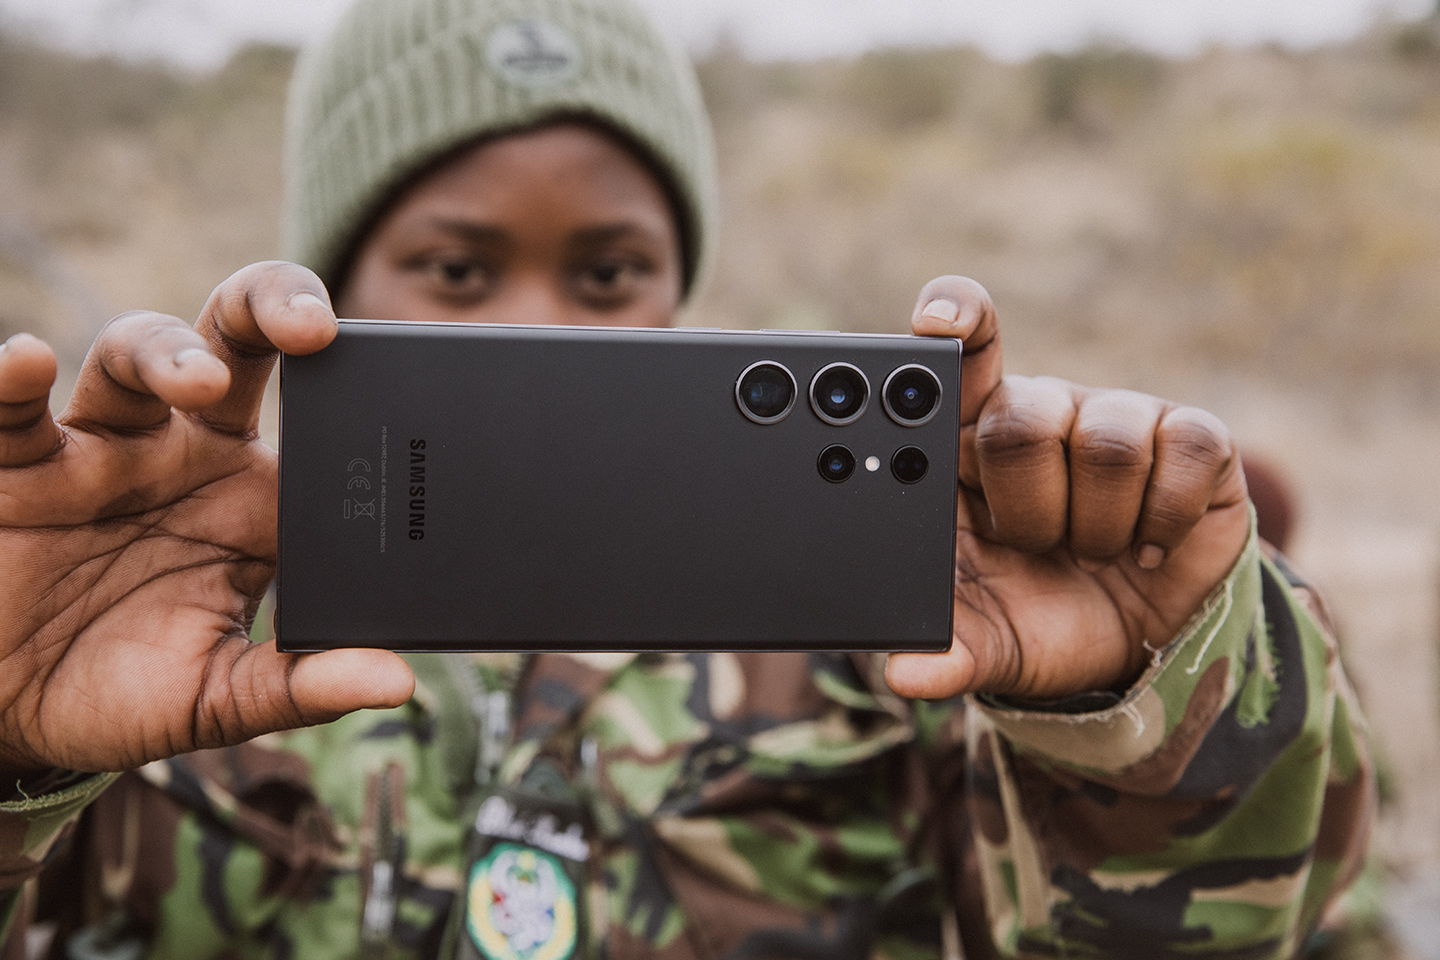 Samsung Expands Wildlife Watch Programme to Help Protect Against Animal Poaching in the South African Bush